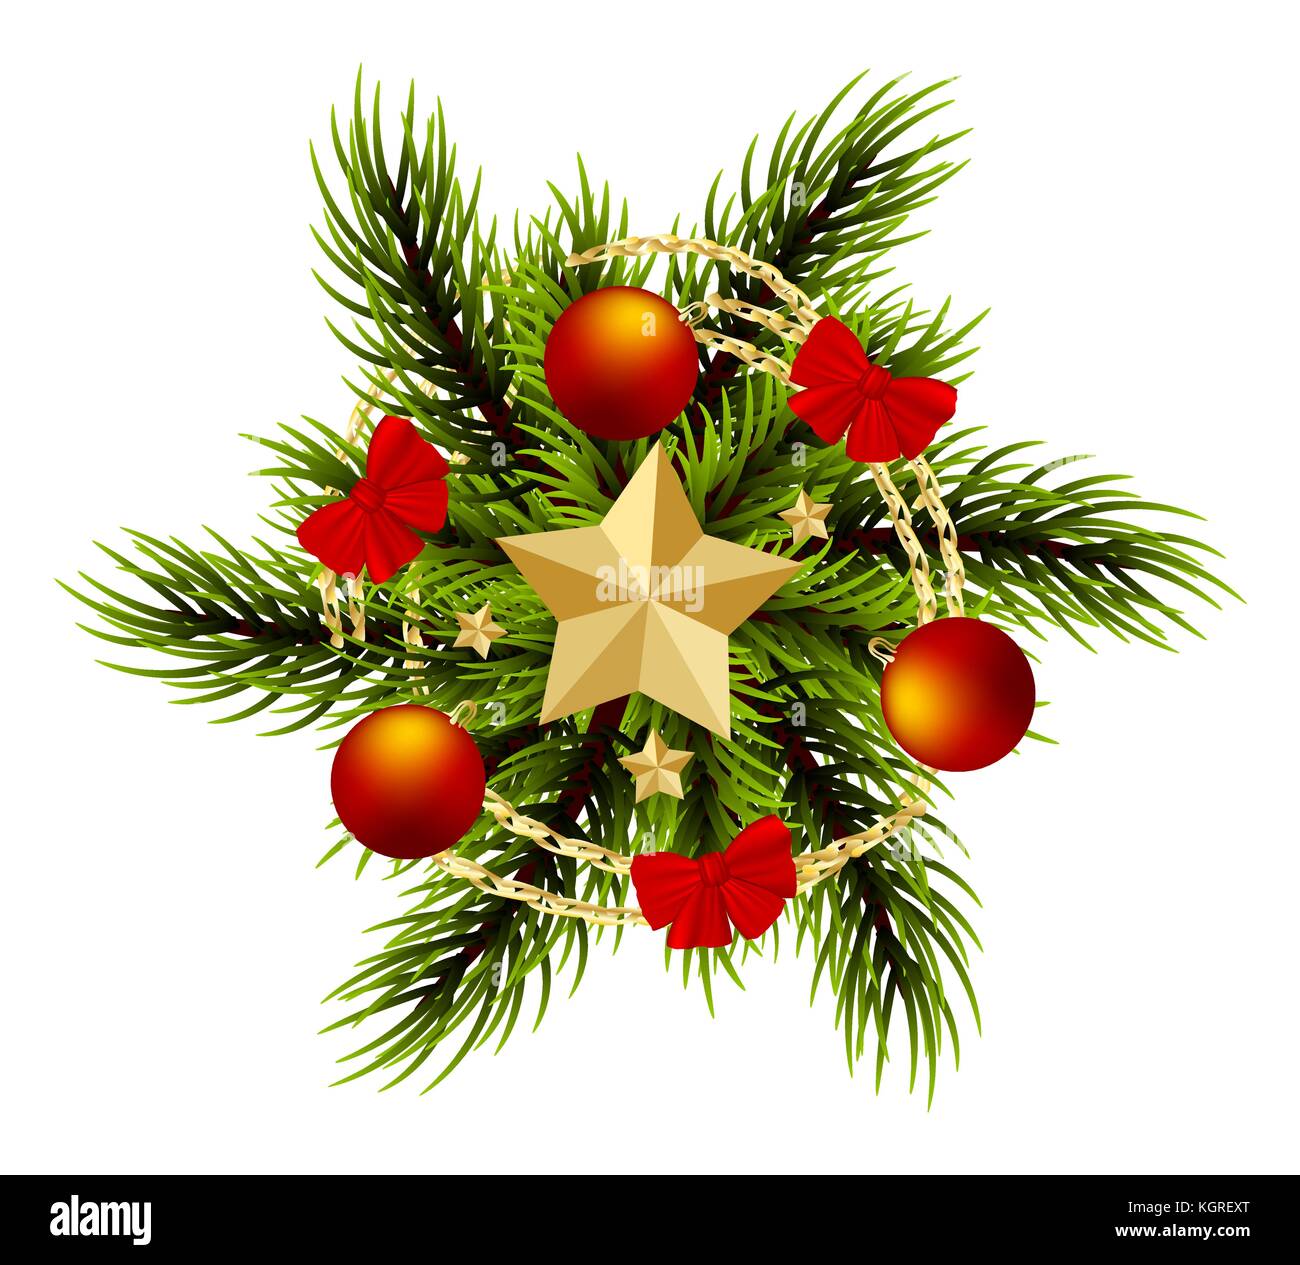 Wreath realistic Merry Christmas branch pine tree Stock Vector